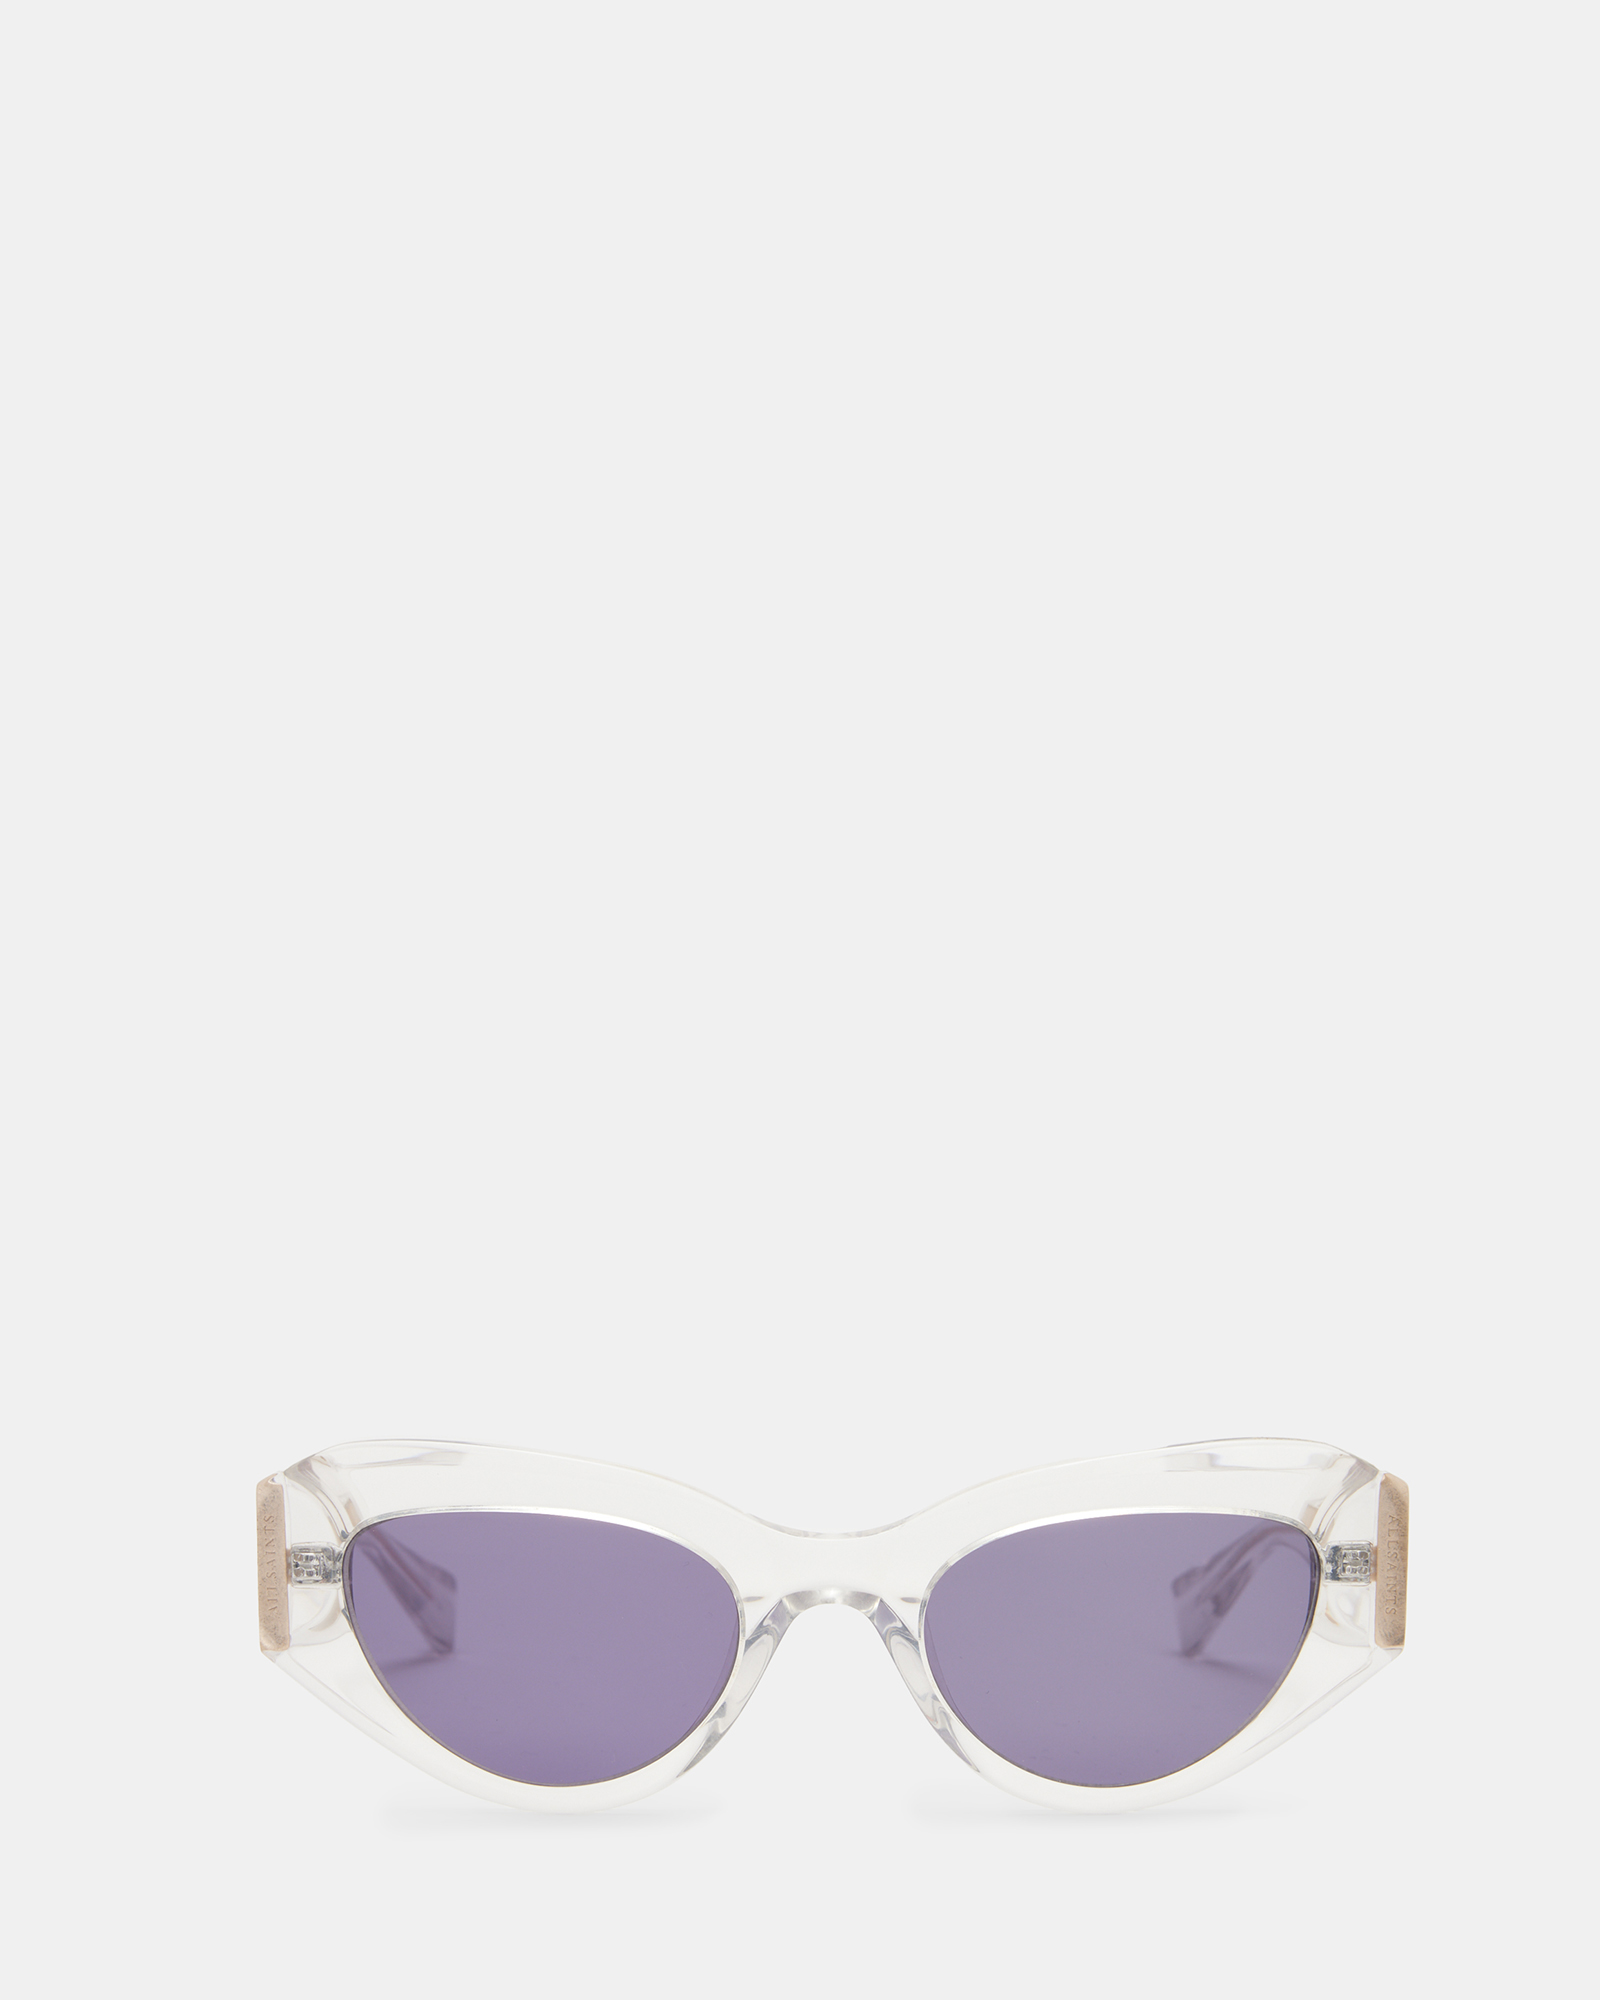 AllSaints Calypso Bevelled Cat Eye Sunglasses,, Clear, Size: One Size